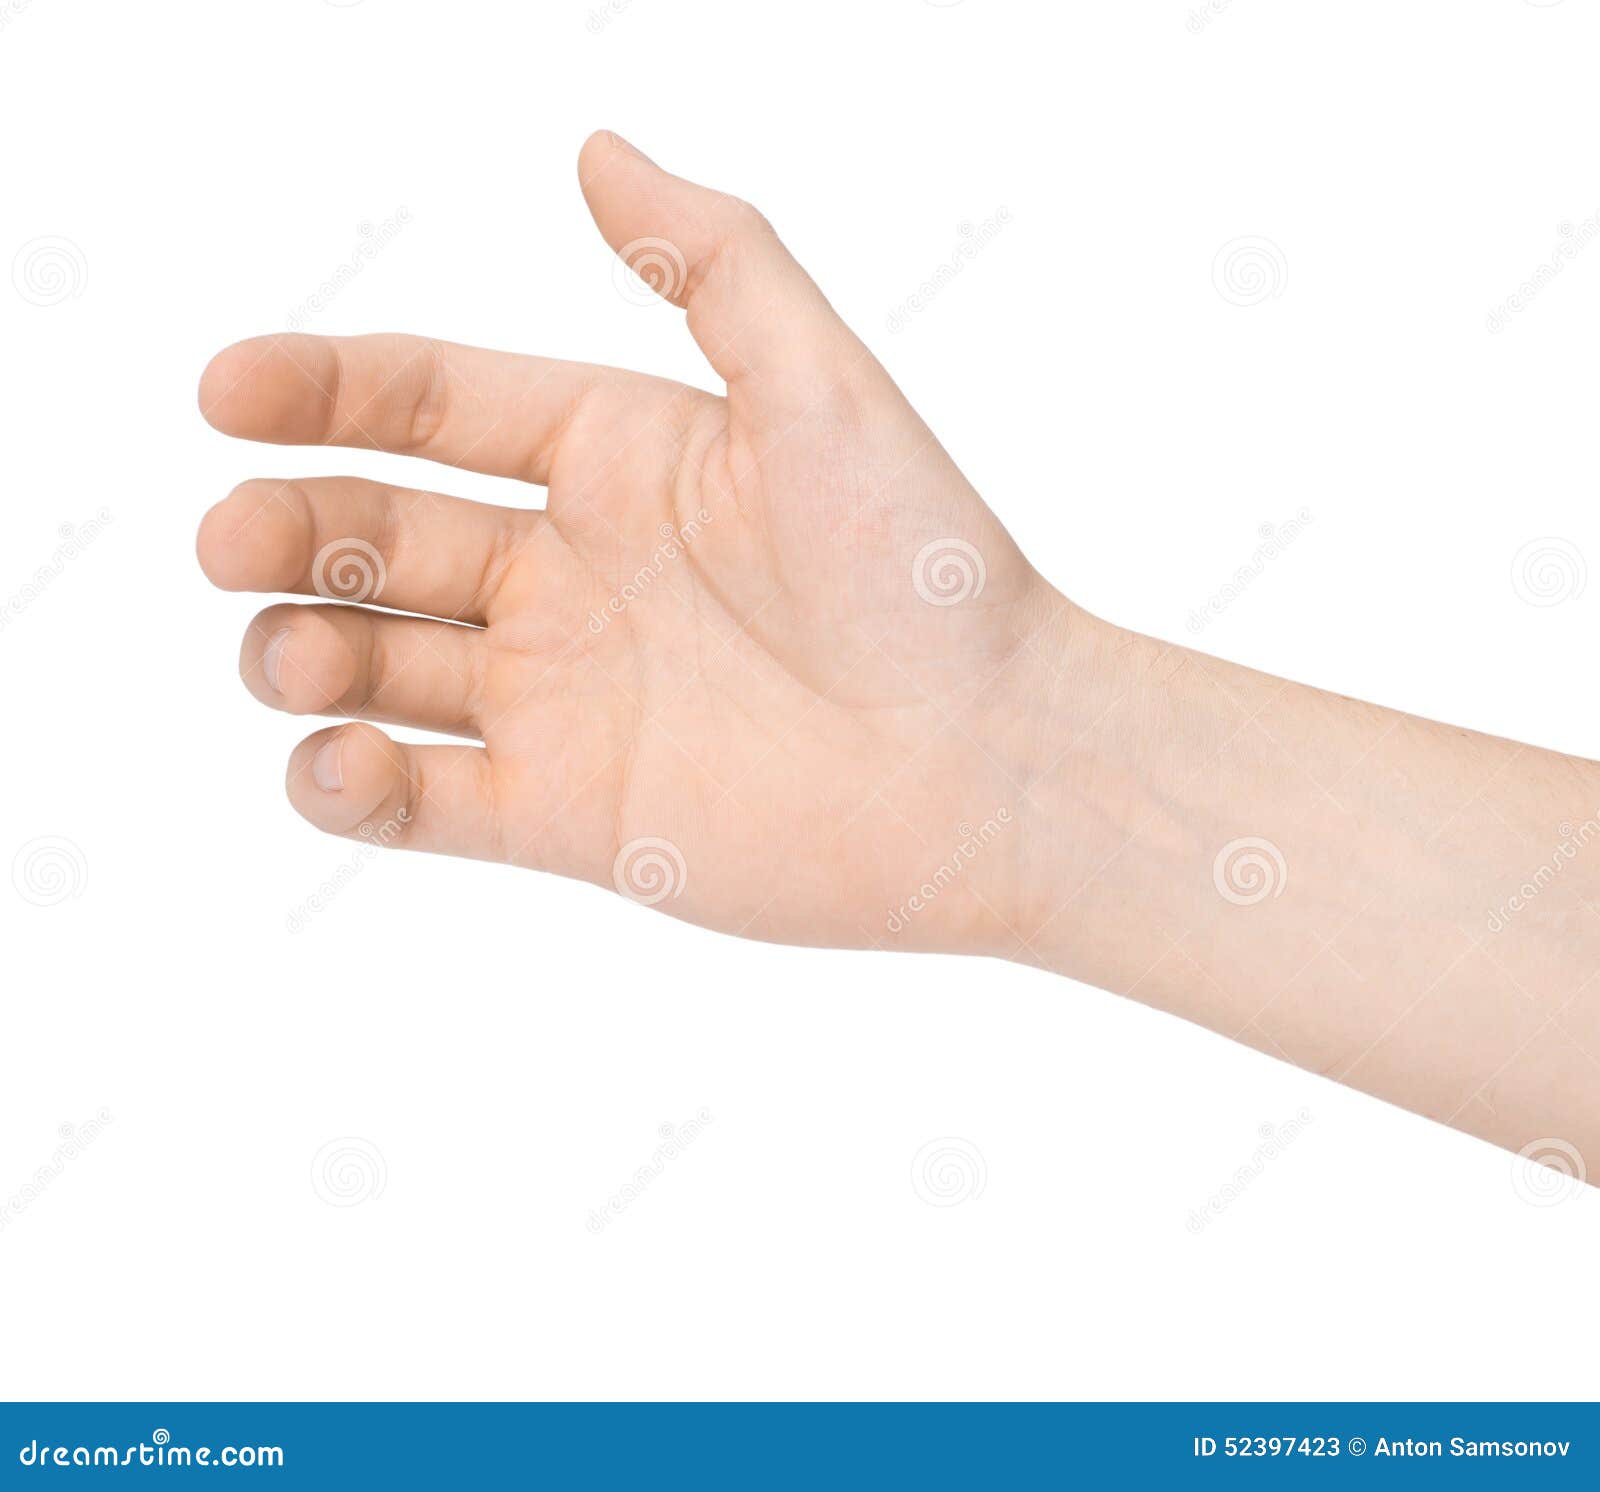 hand-man-to-hold-card-mobile-phone-tablet-pc-other-palm-gadget-isolated-52397423.jpg